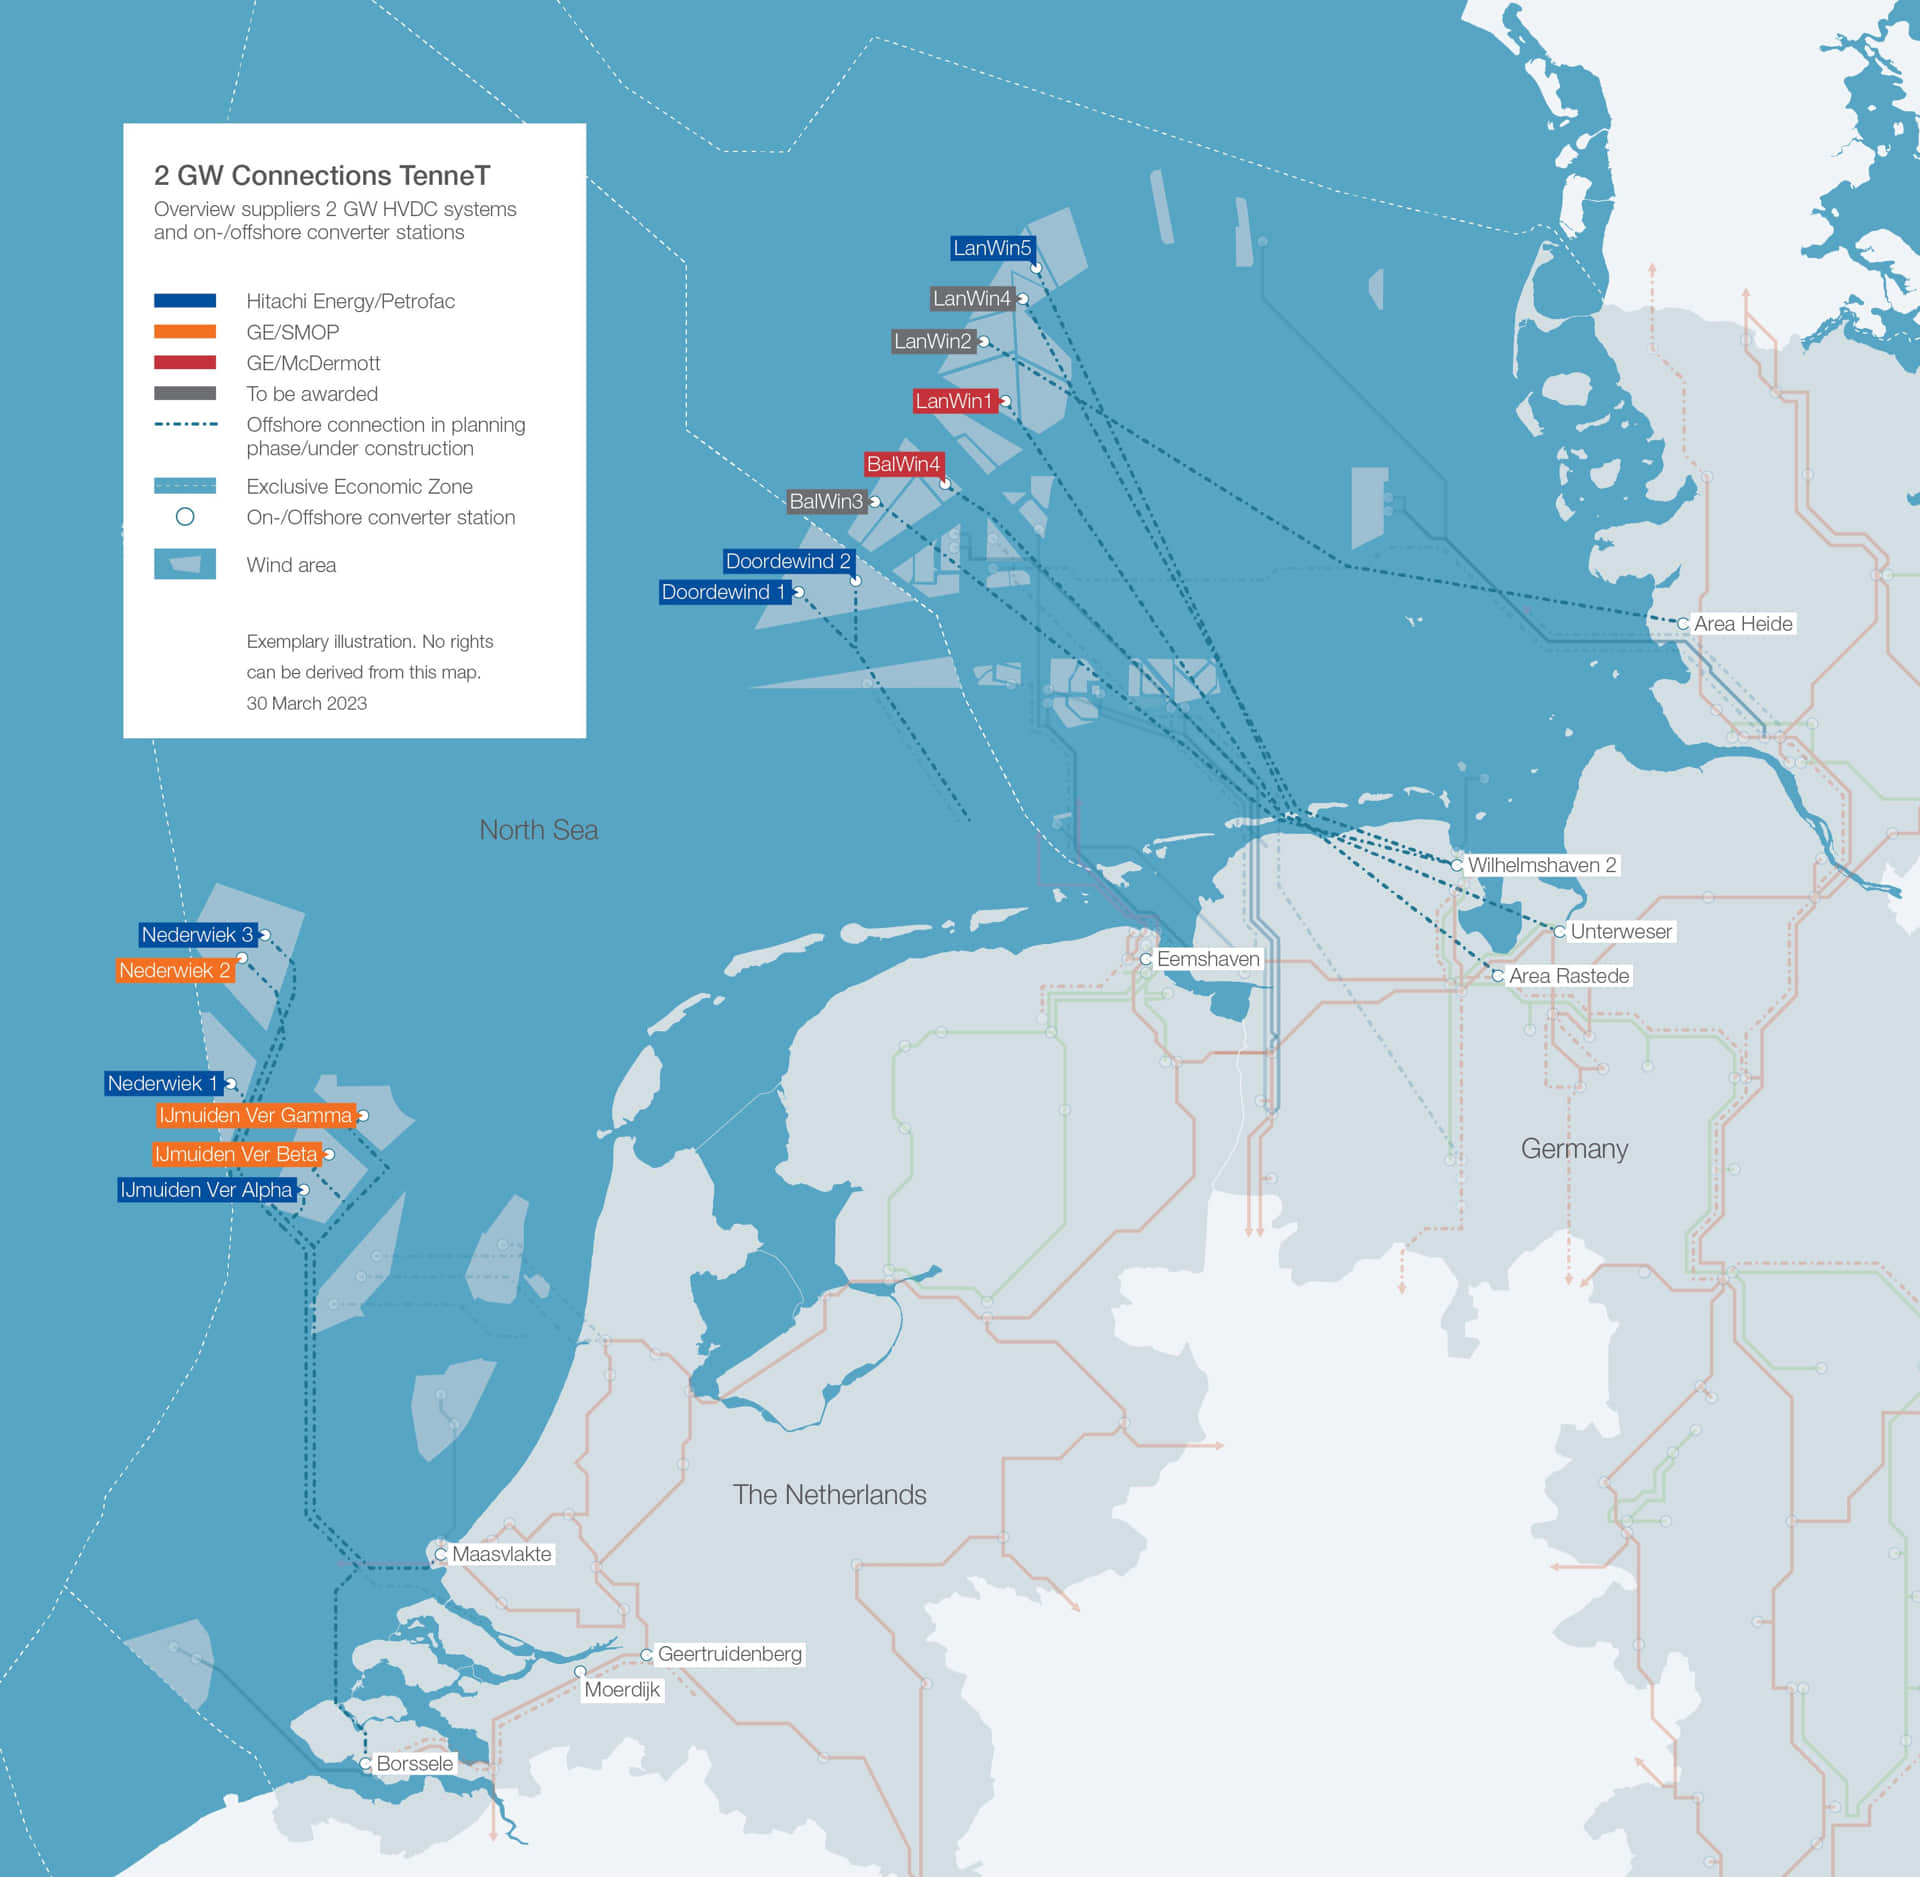 An image showing a map of TenneT's offshore grid connections in Germany and the Netherlands